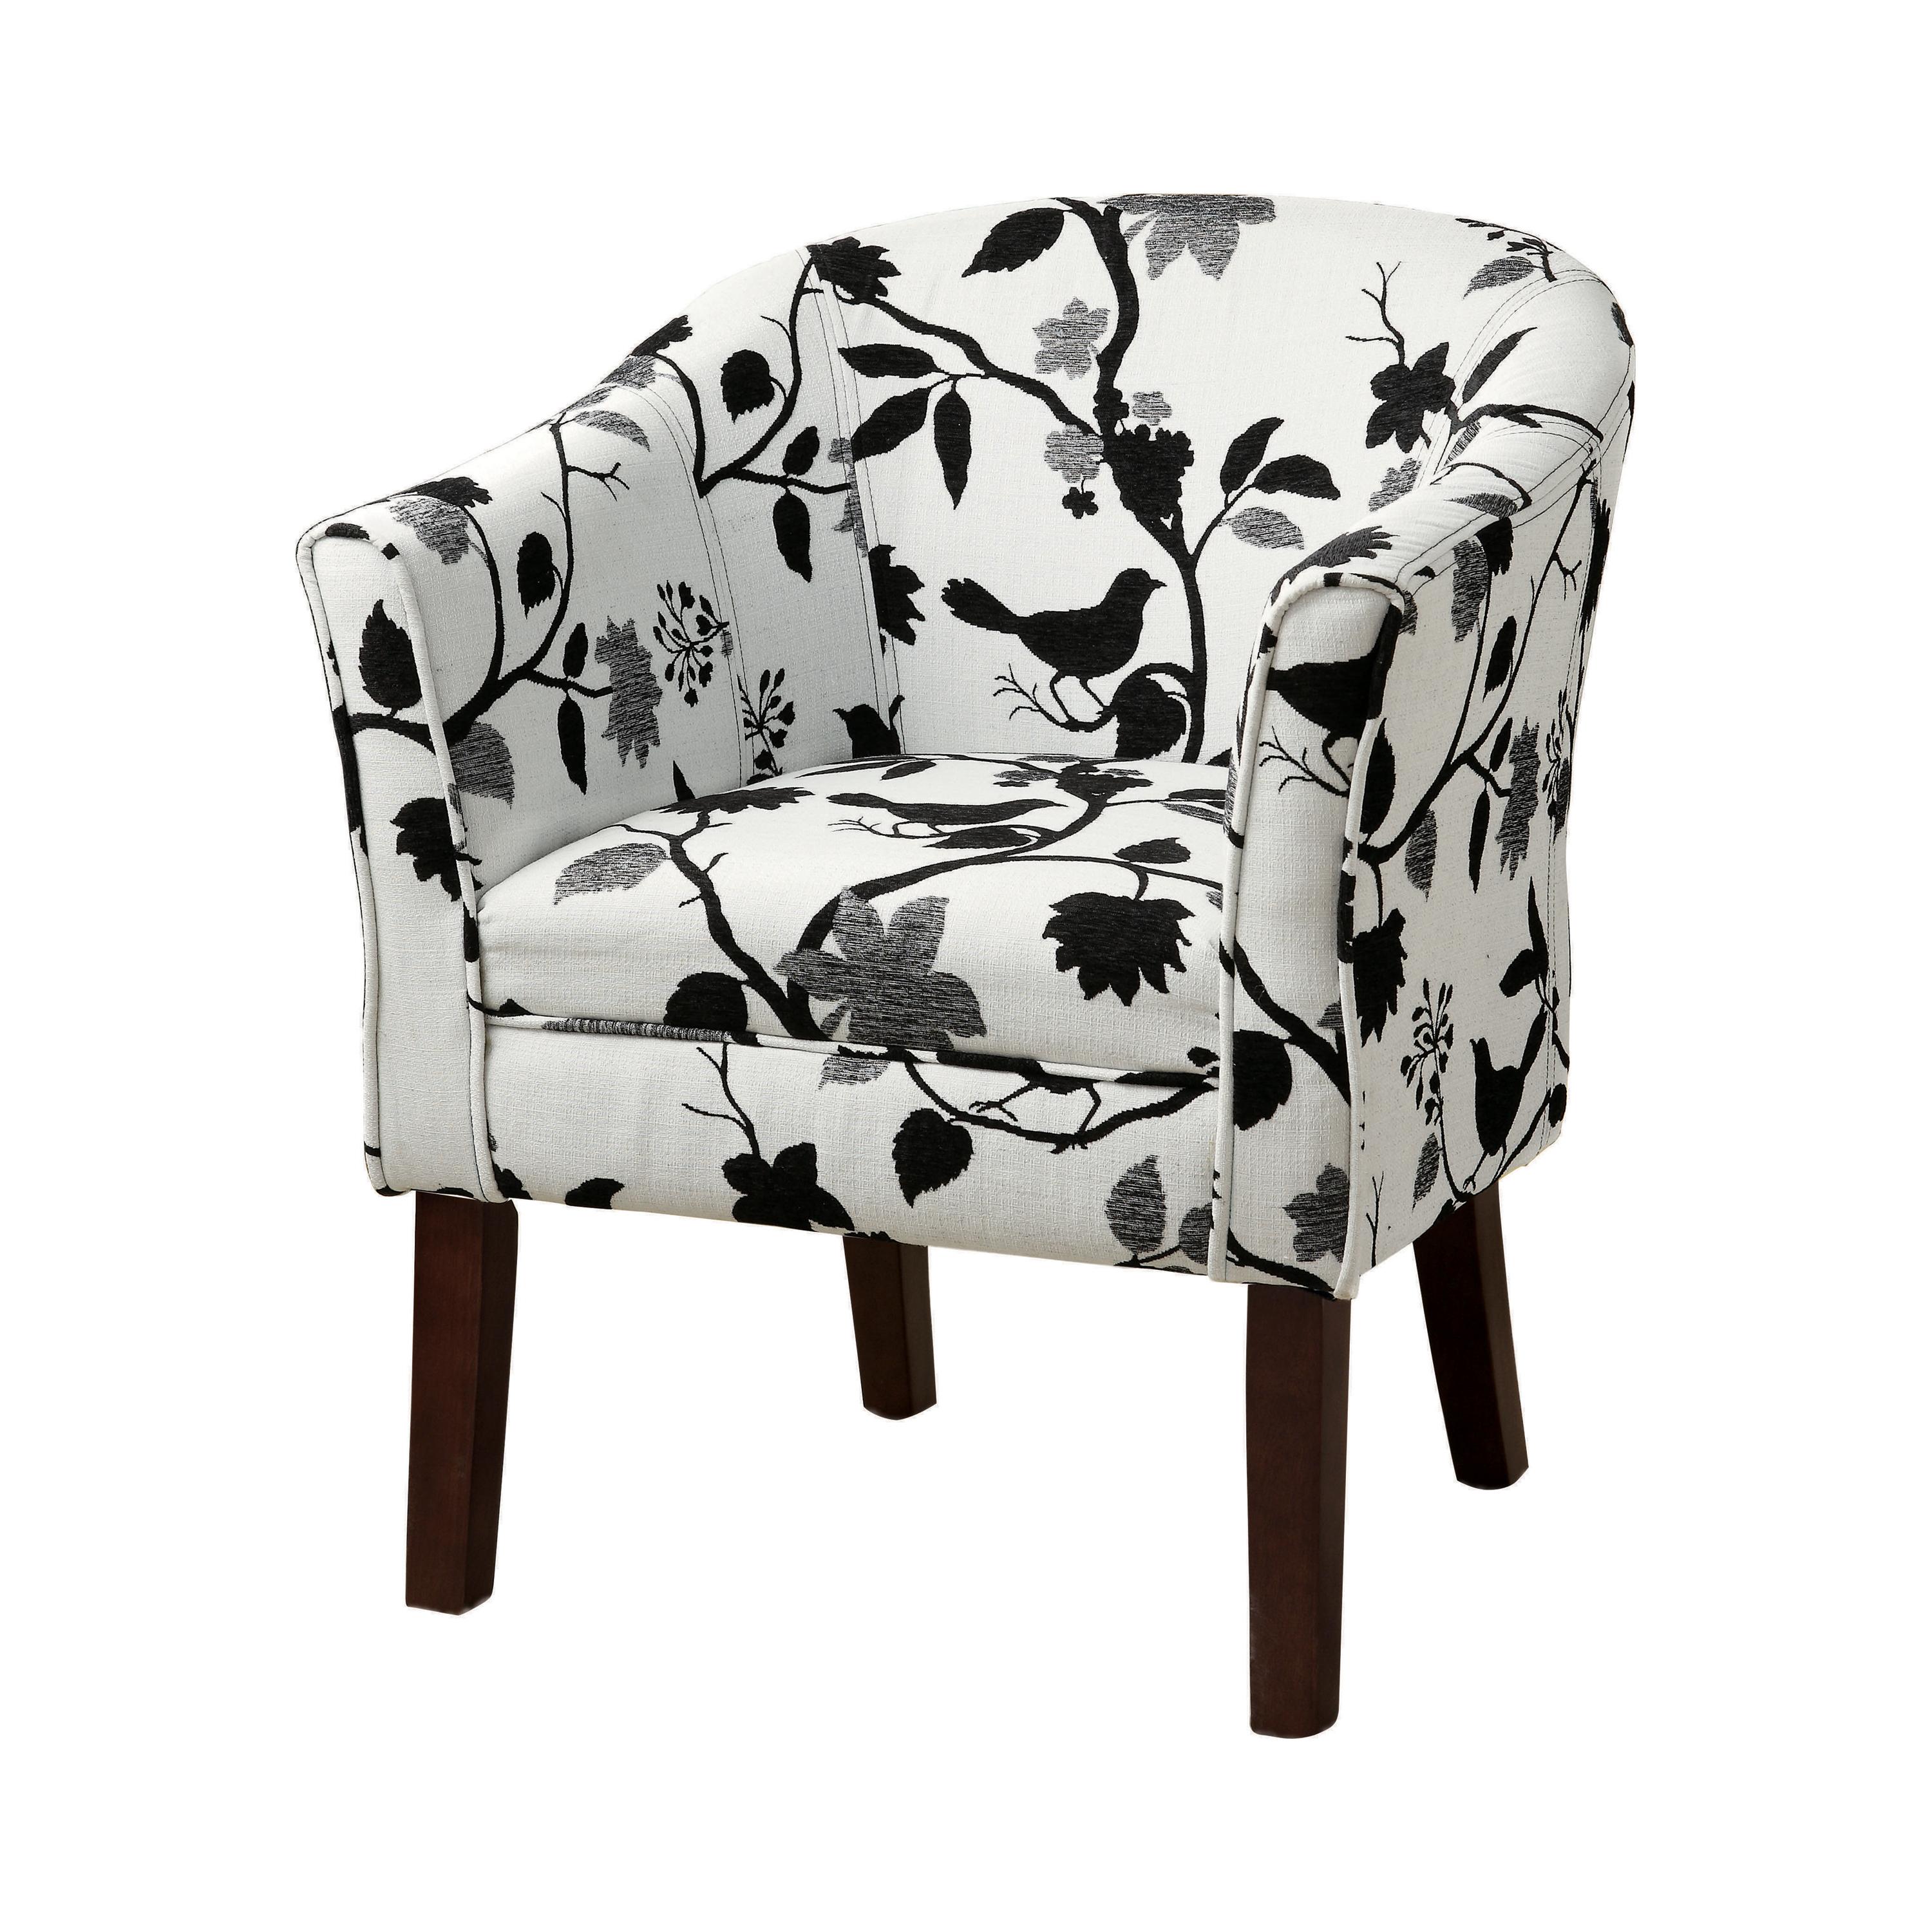 Transitional Accent Chair 460406 460406 in White, Black 